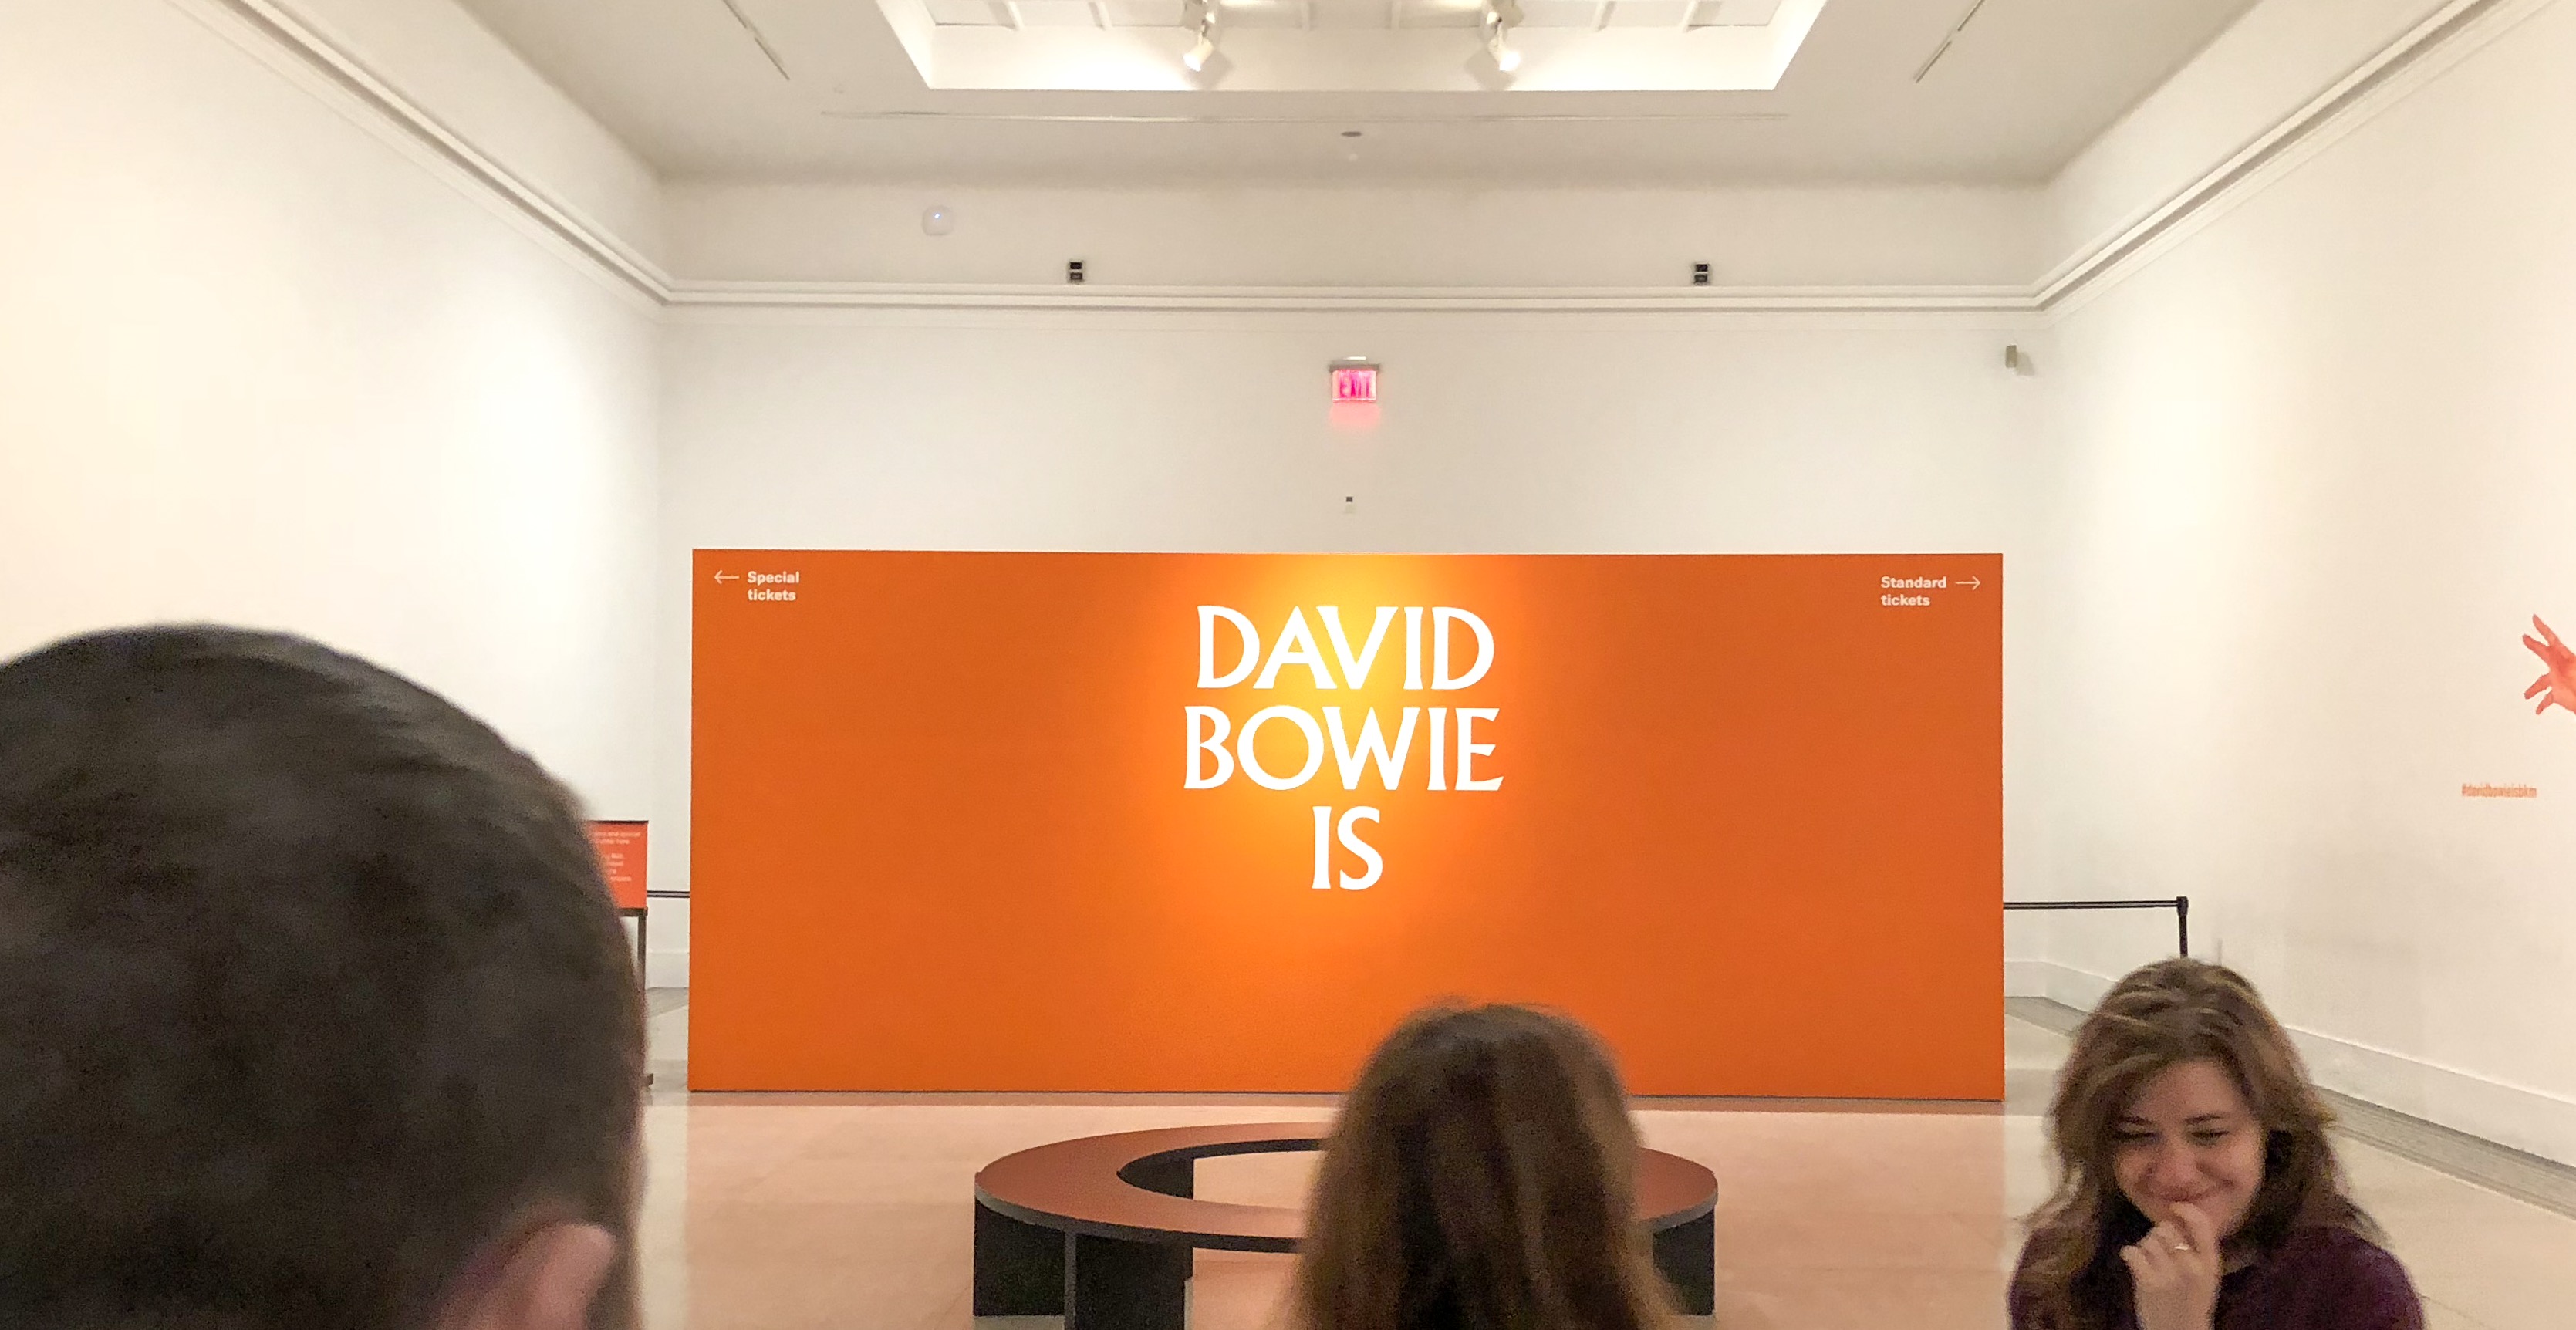 Entrance to “David Bowie Is” Exhibition at The Brooklyn Museum